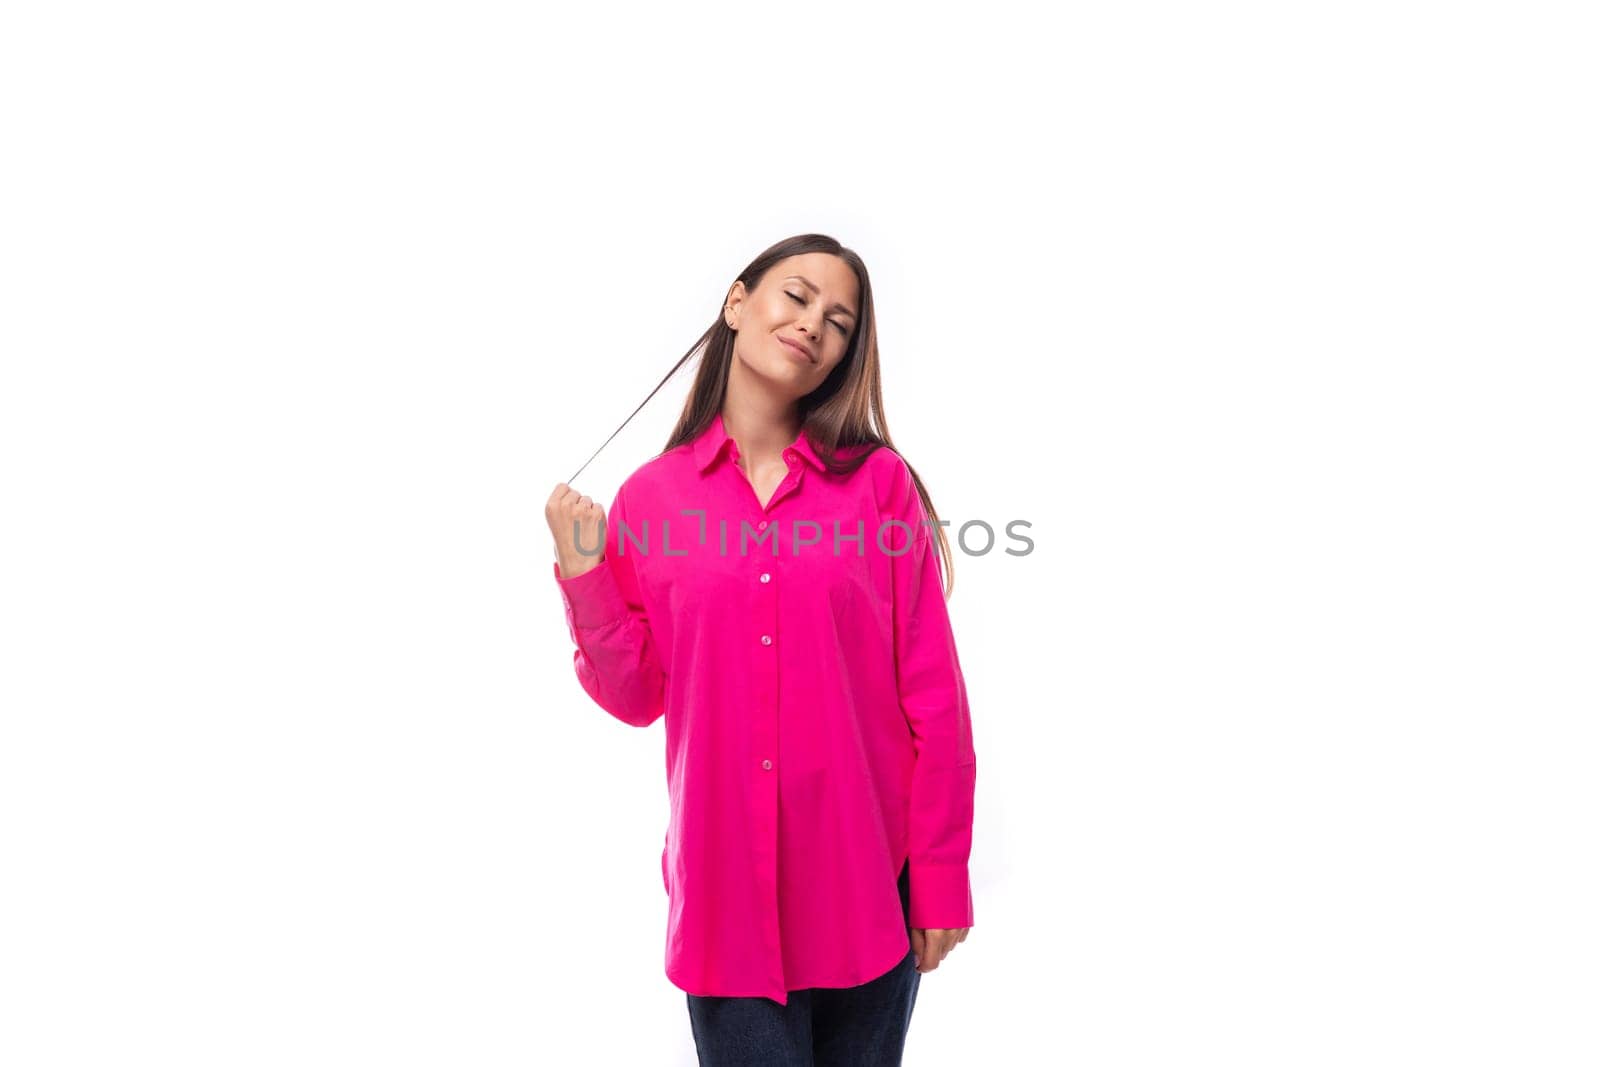 portrait of a dreamy young lady with black hair in a crimson oversized shirt on a studio white background.